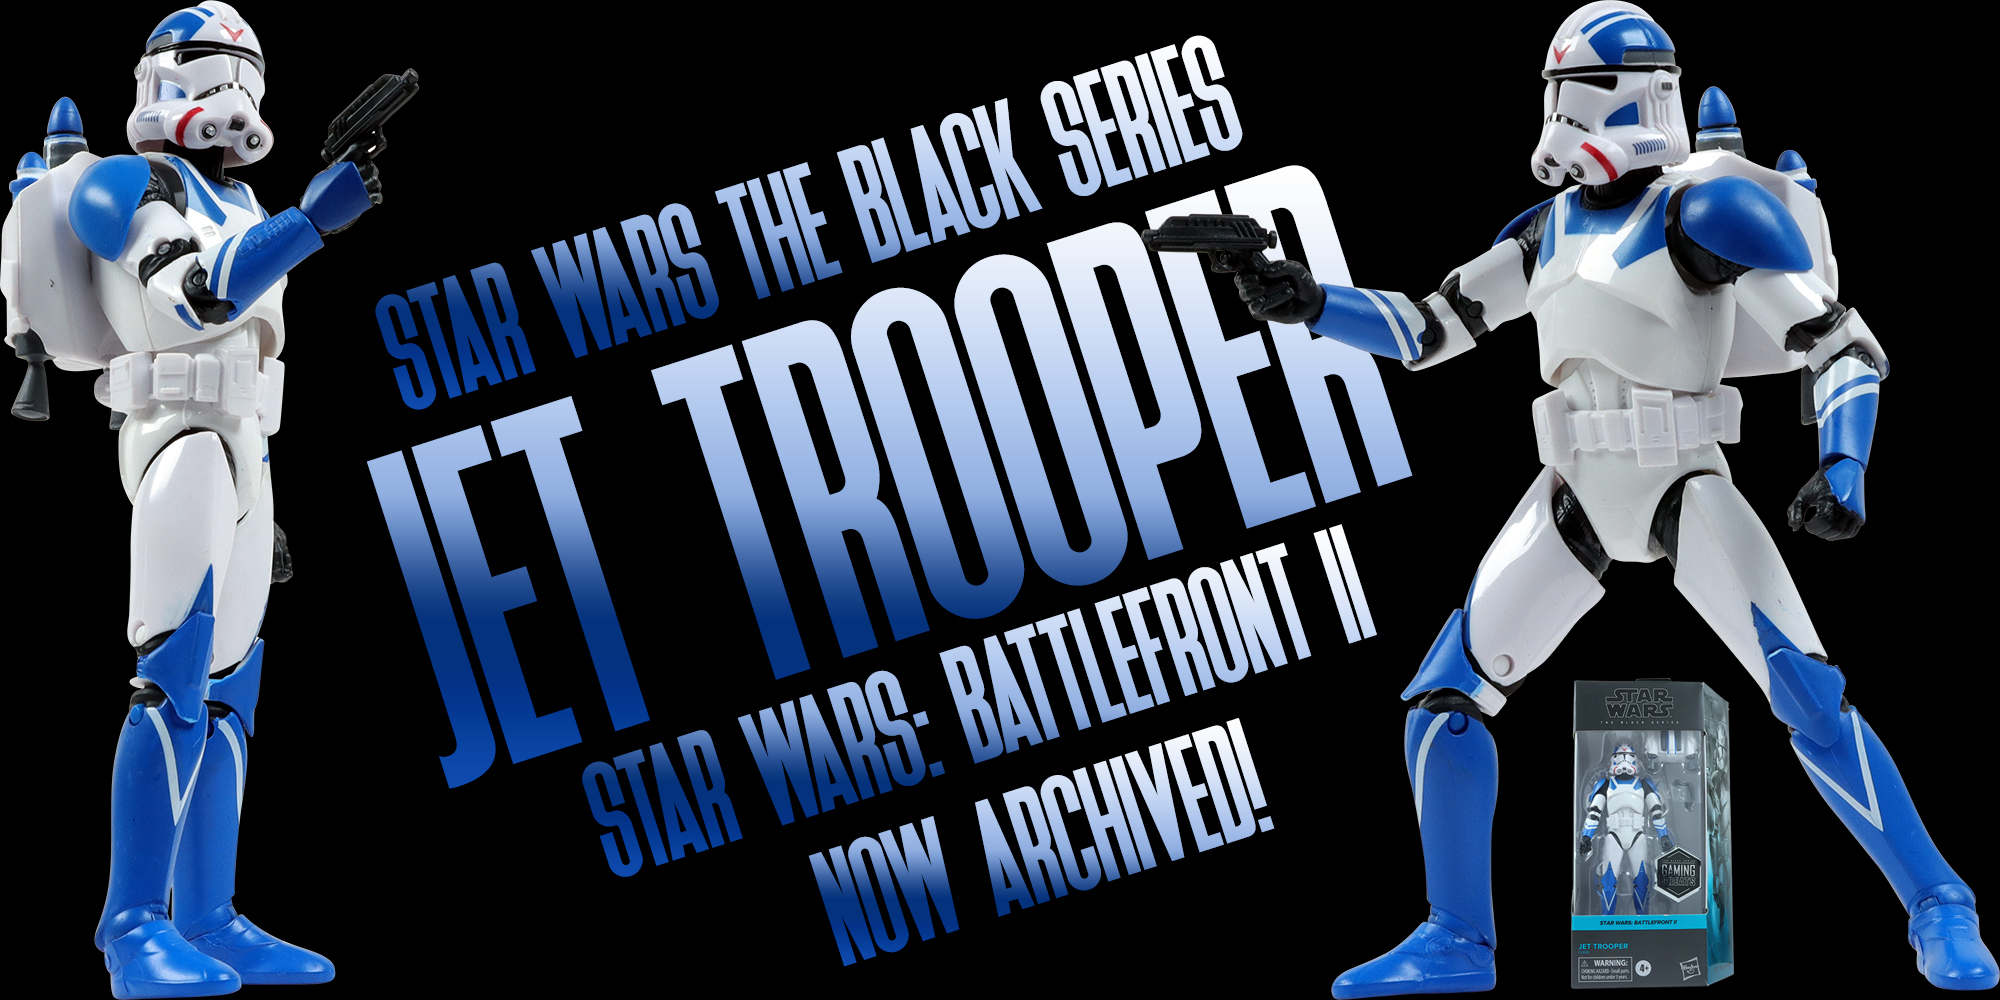 The Black Series 6" Jet Trooper - Now In The Database! - Check It Out!